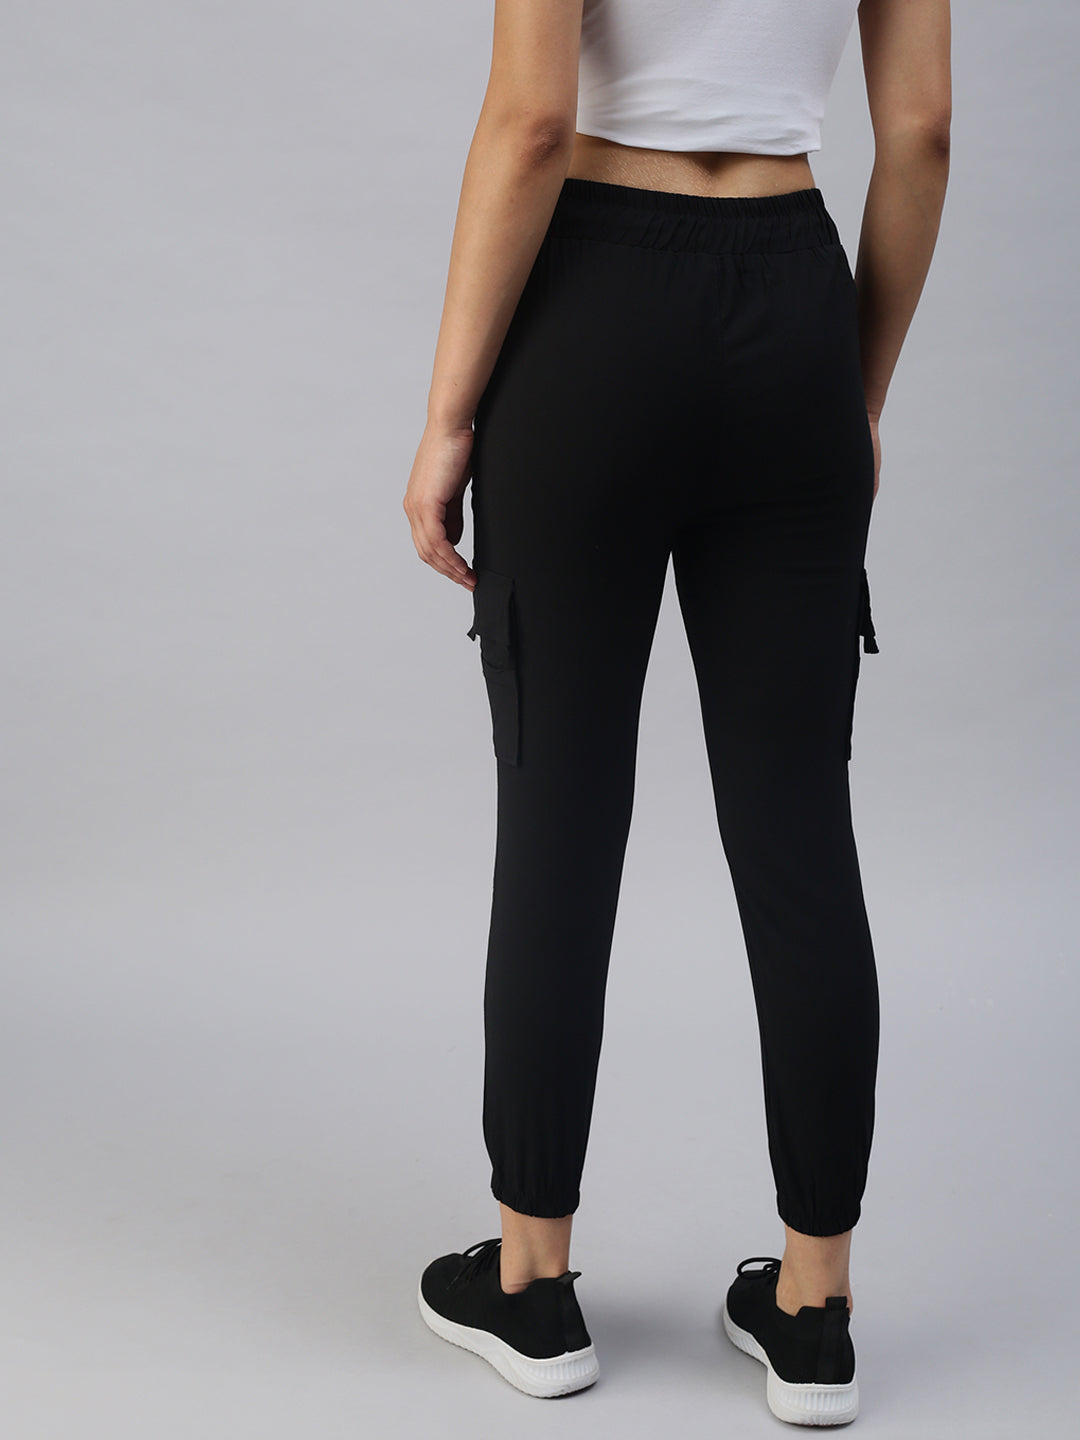 Women's Black Solid Joggers Track Pant